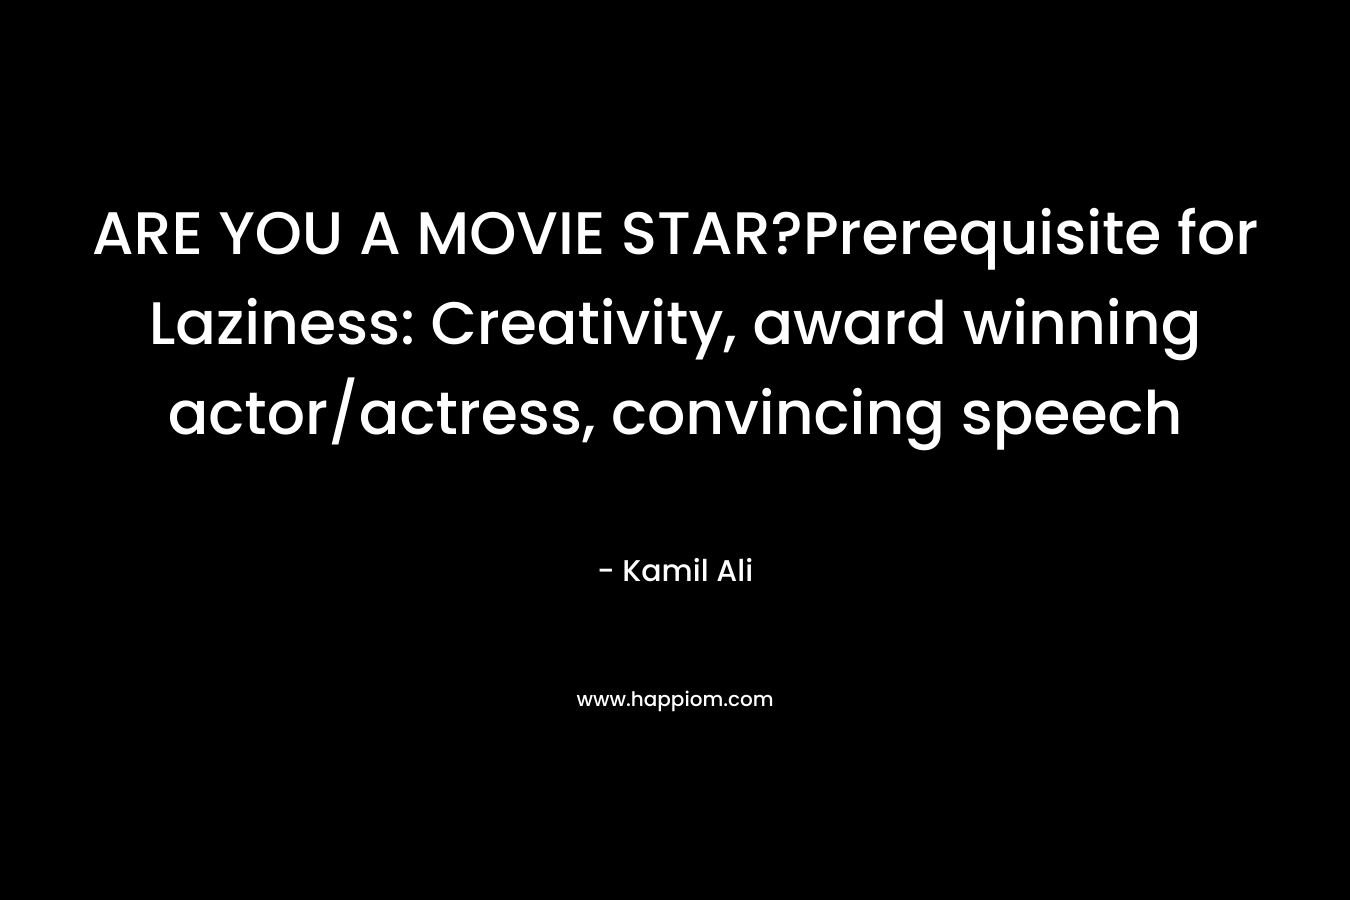 ARE YOU A MOVIE STAR?Prerequisite for Laziness: Creativity, award winning actor/actress, convincing speech